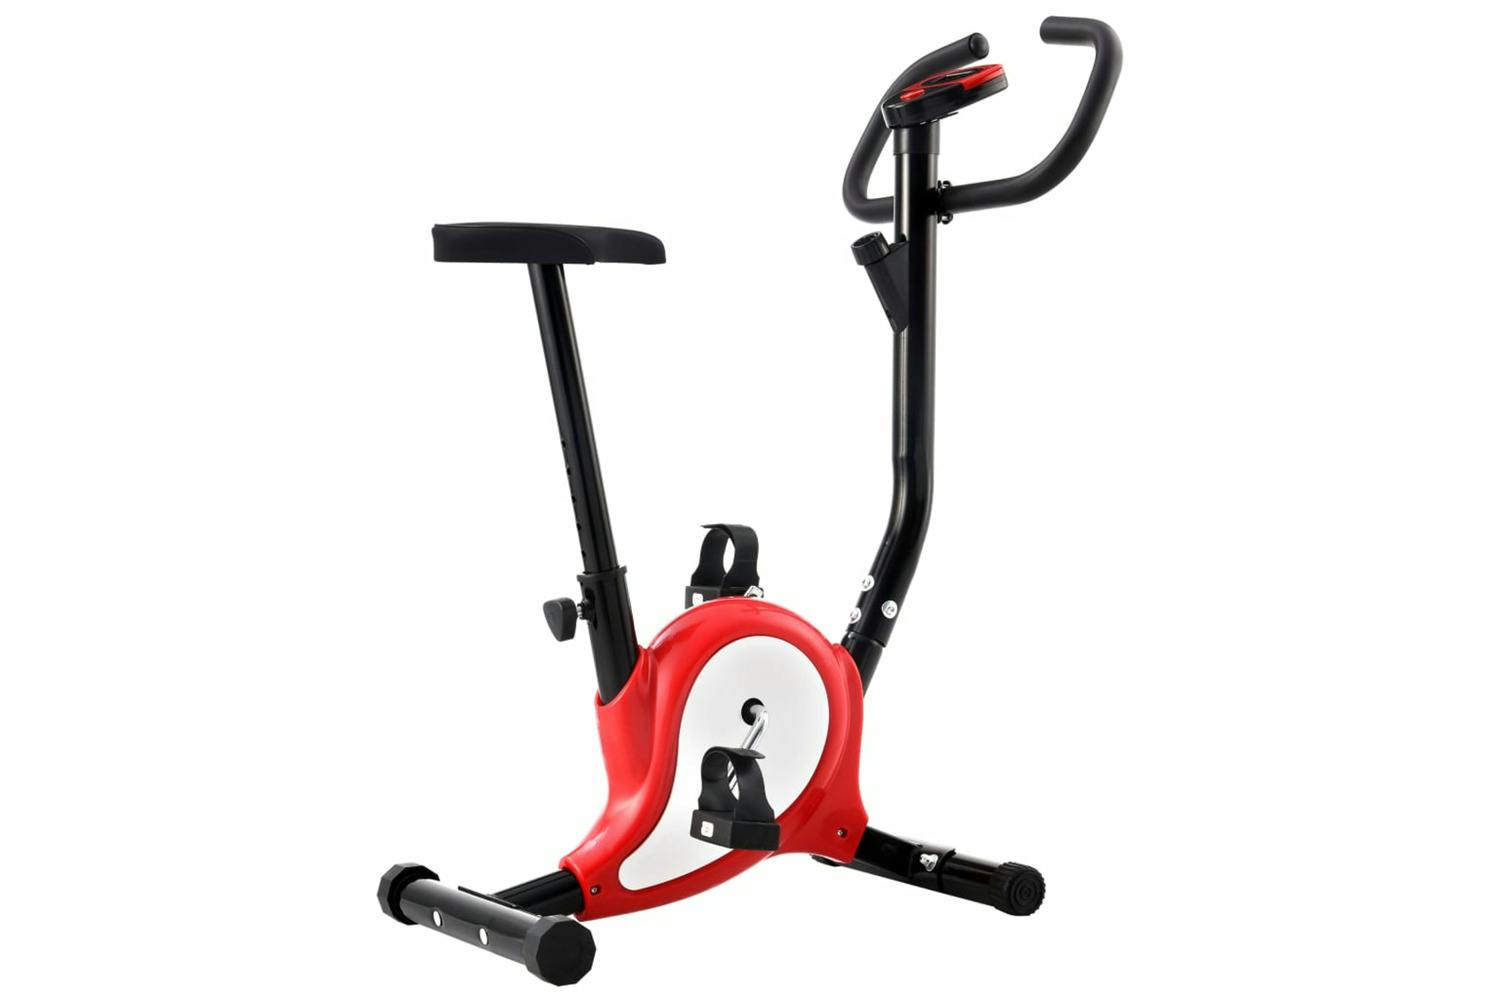 Vidaxl 92012 Exercise Bike With Belt Resistance Red